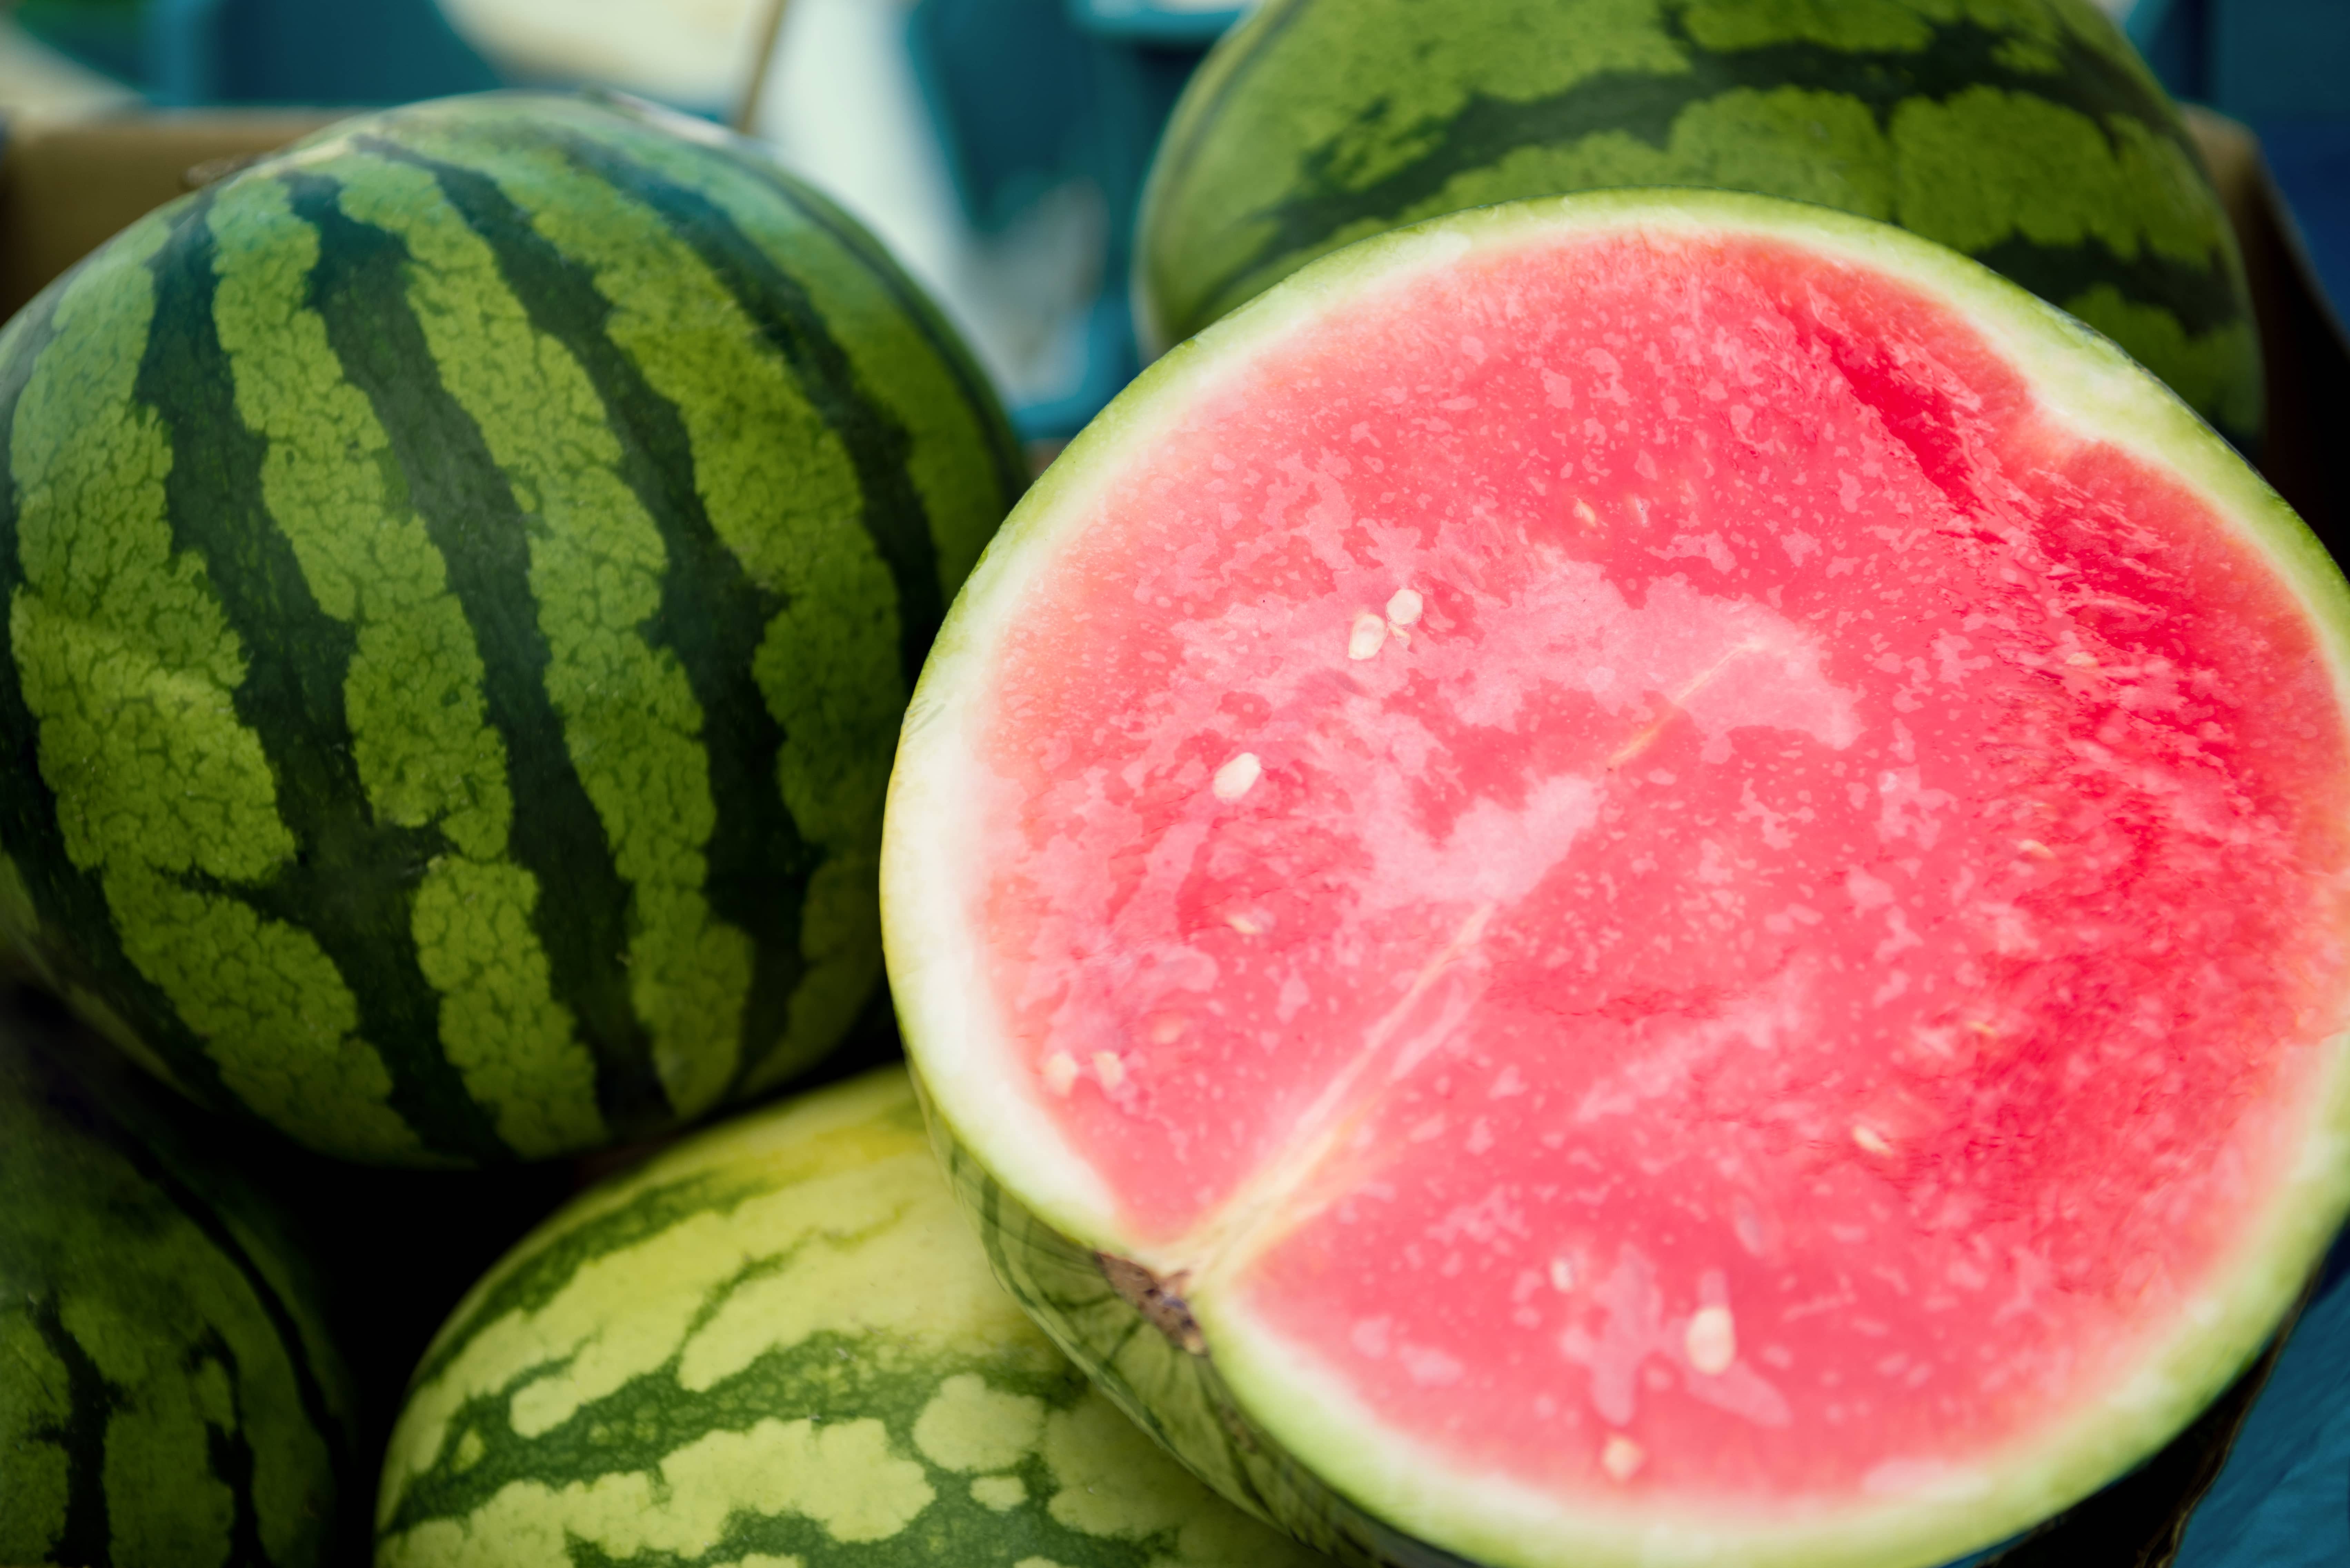 close-up-view-of-half-of-watermelon-and-watermelons